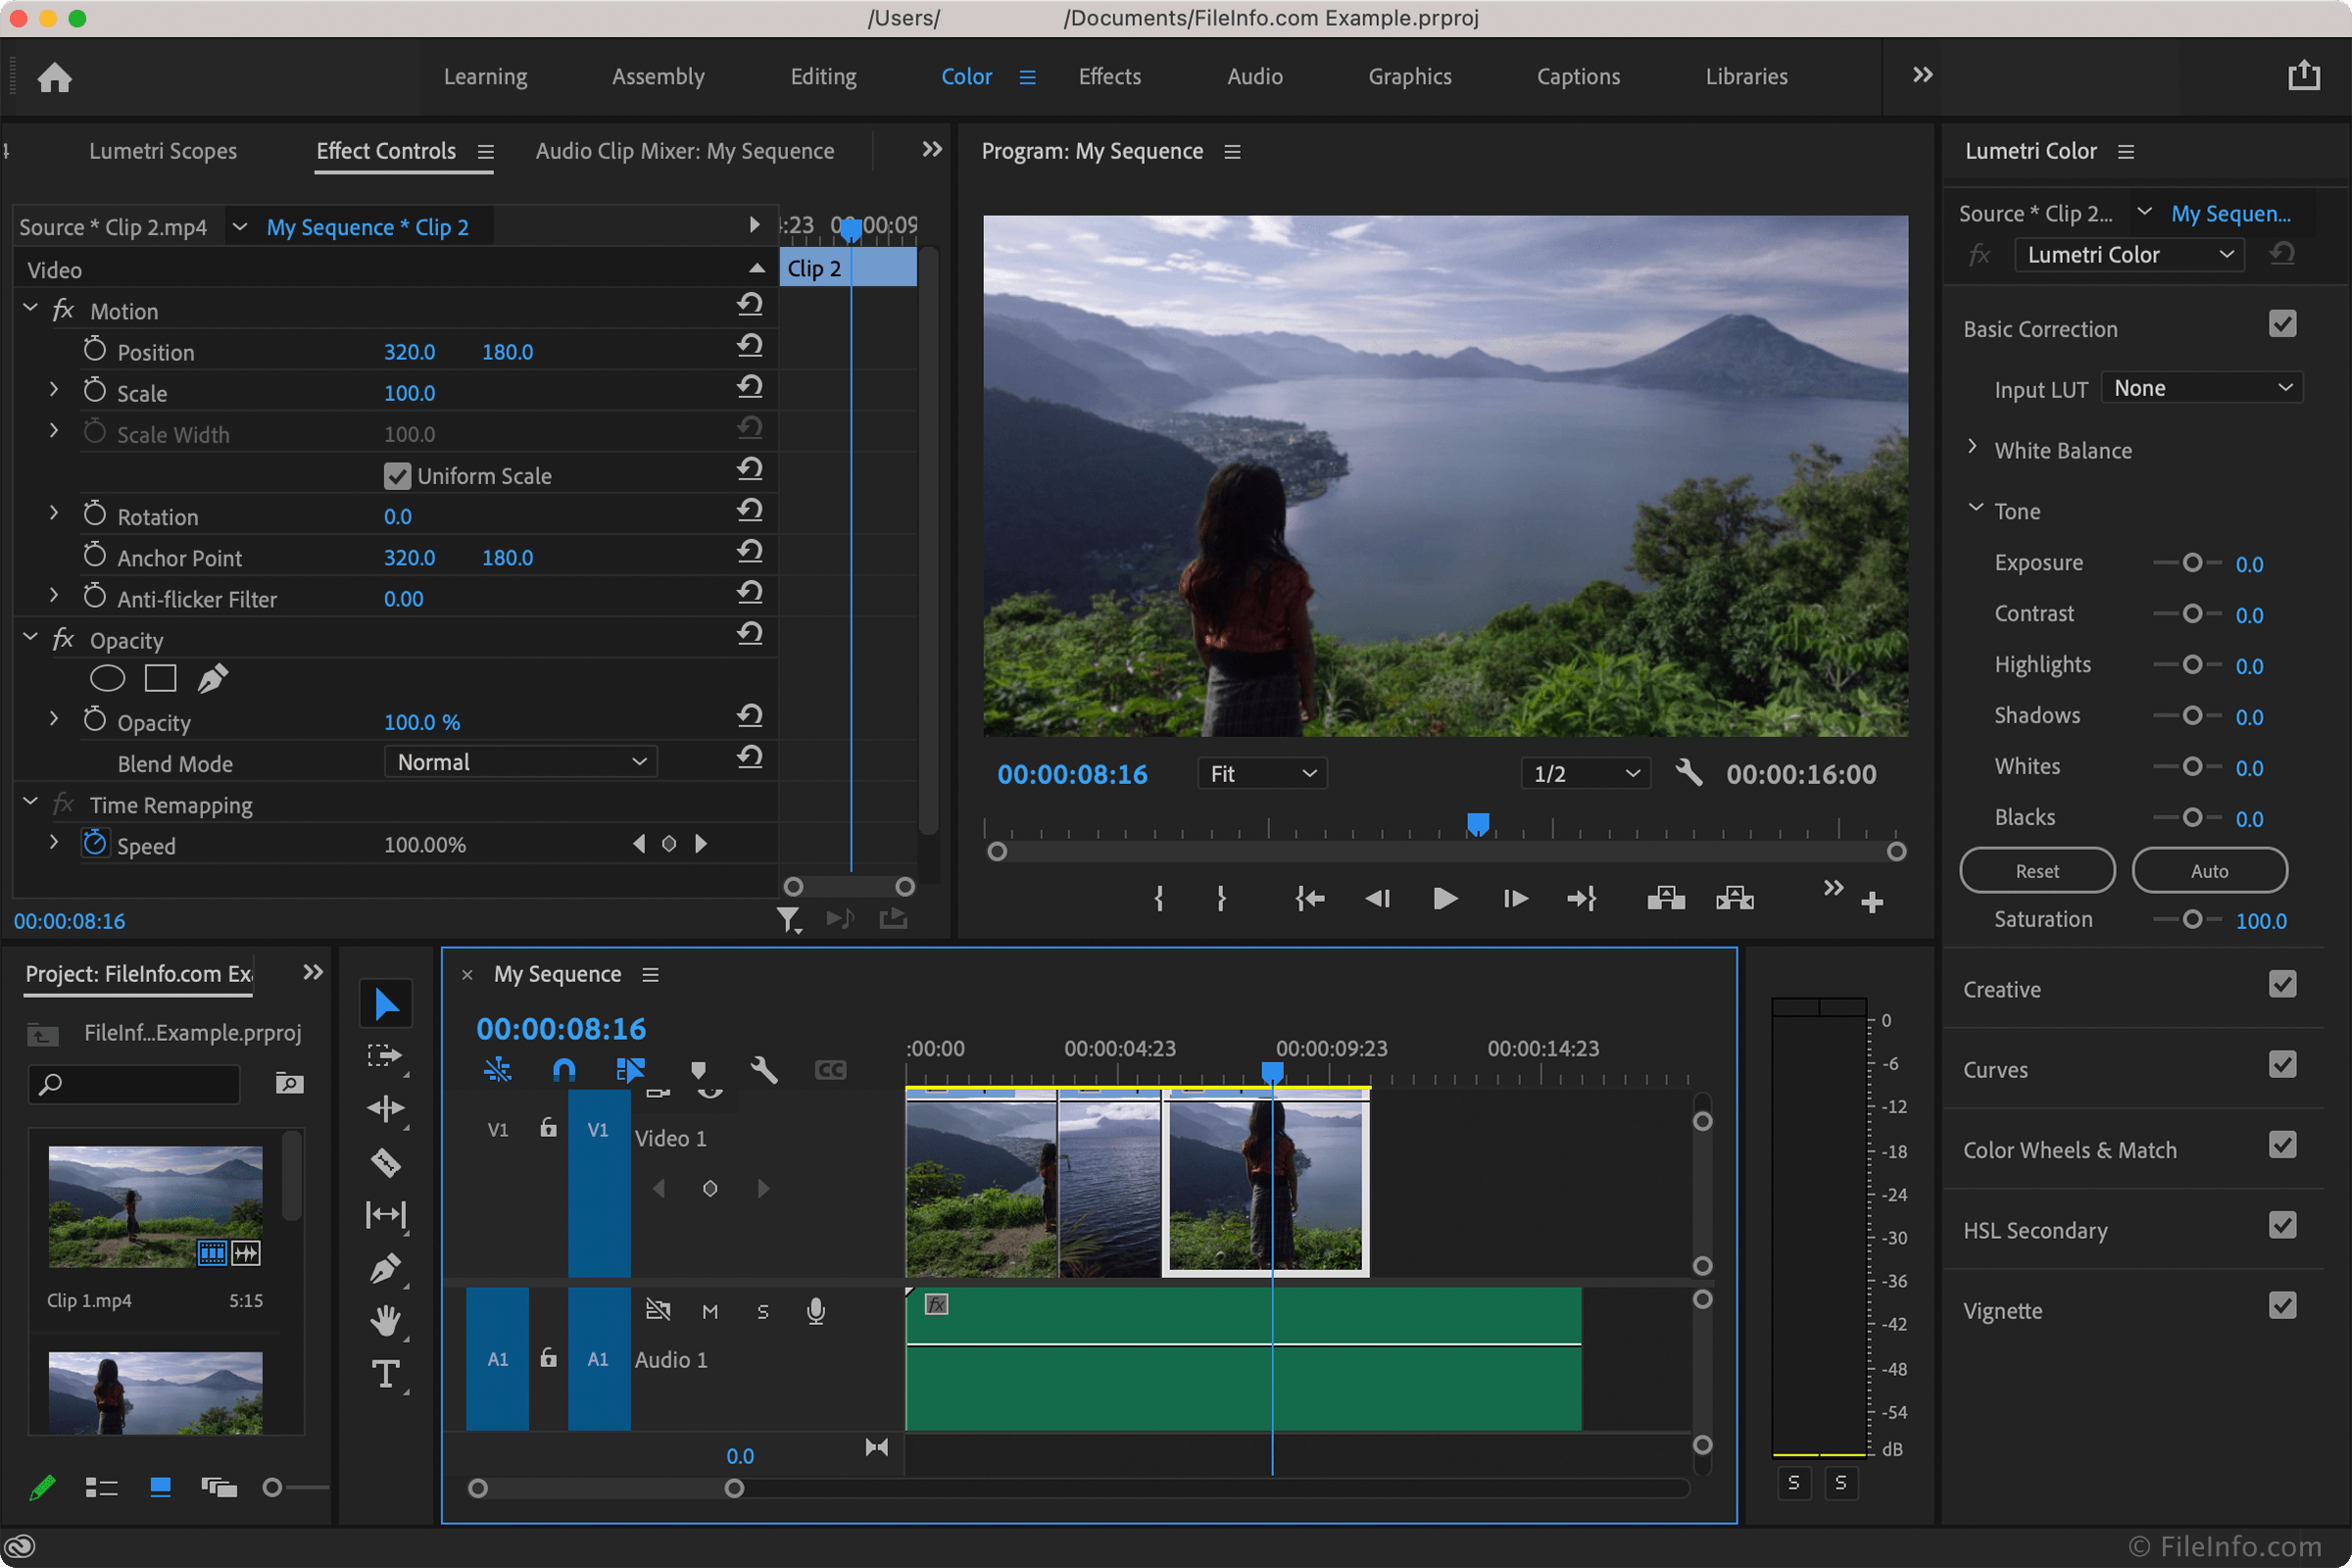 Adobe Premiere Pro 2022 Overview and Supported File Types